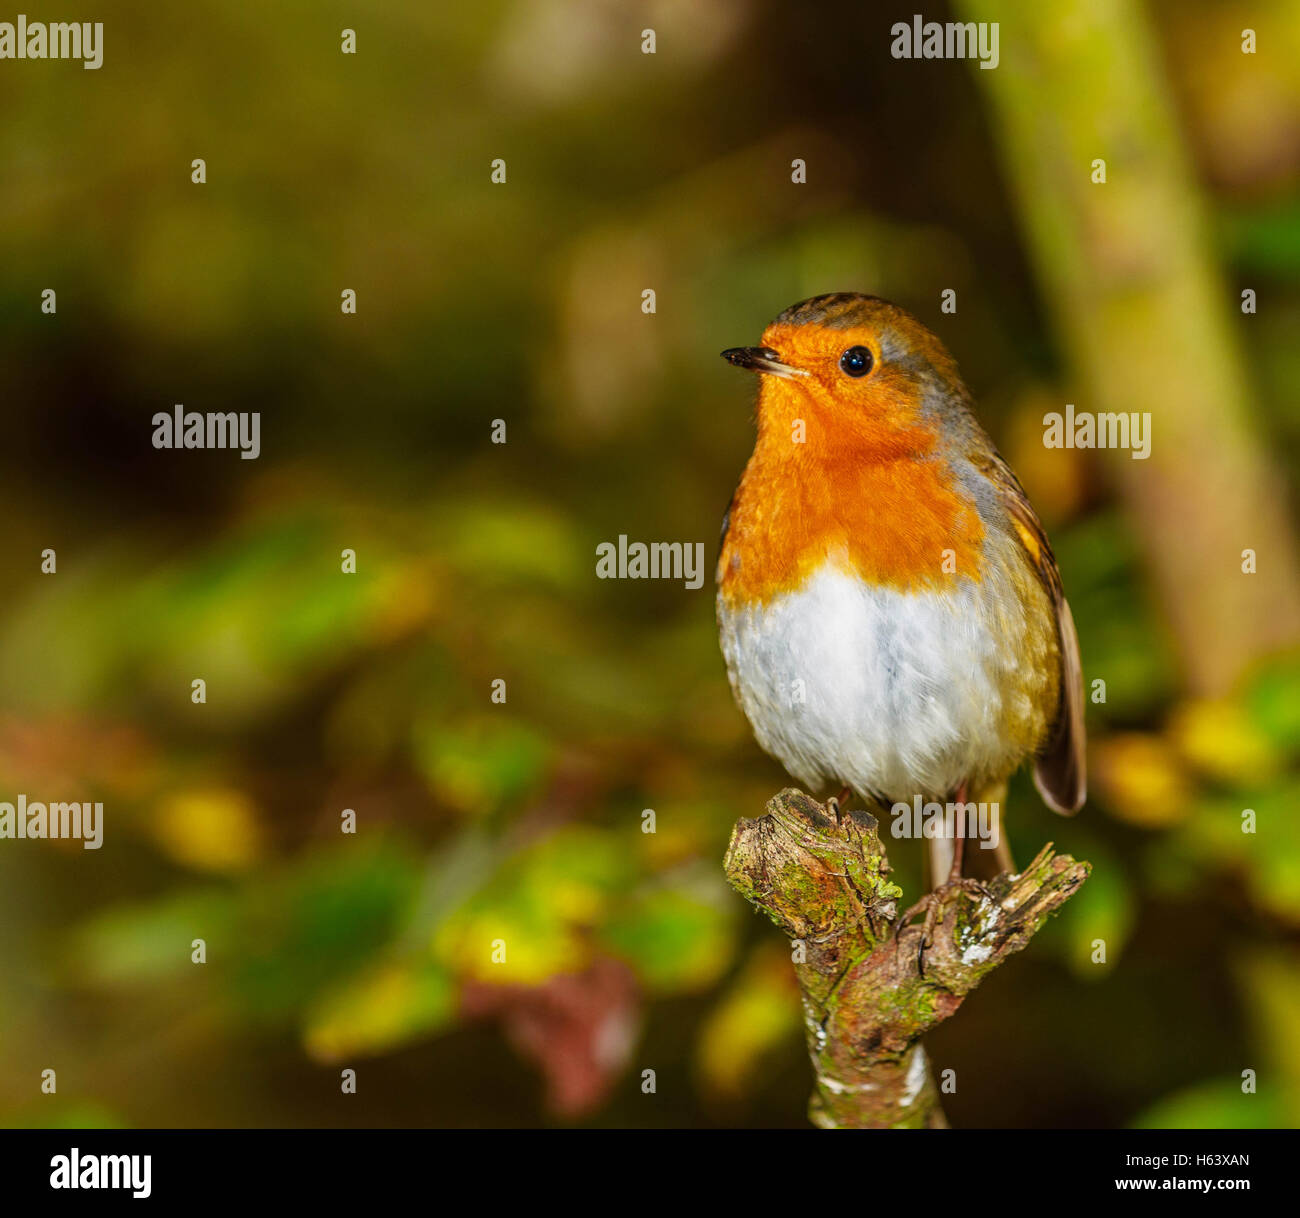 The most perfect picture for Christmas. This little Robin Red Breast seem to pose for me. Stock Photo